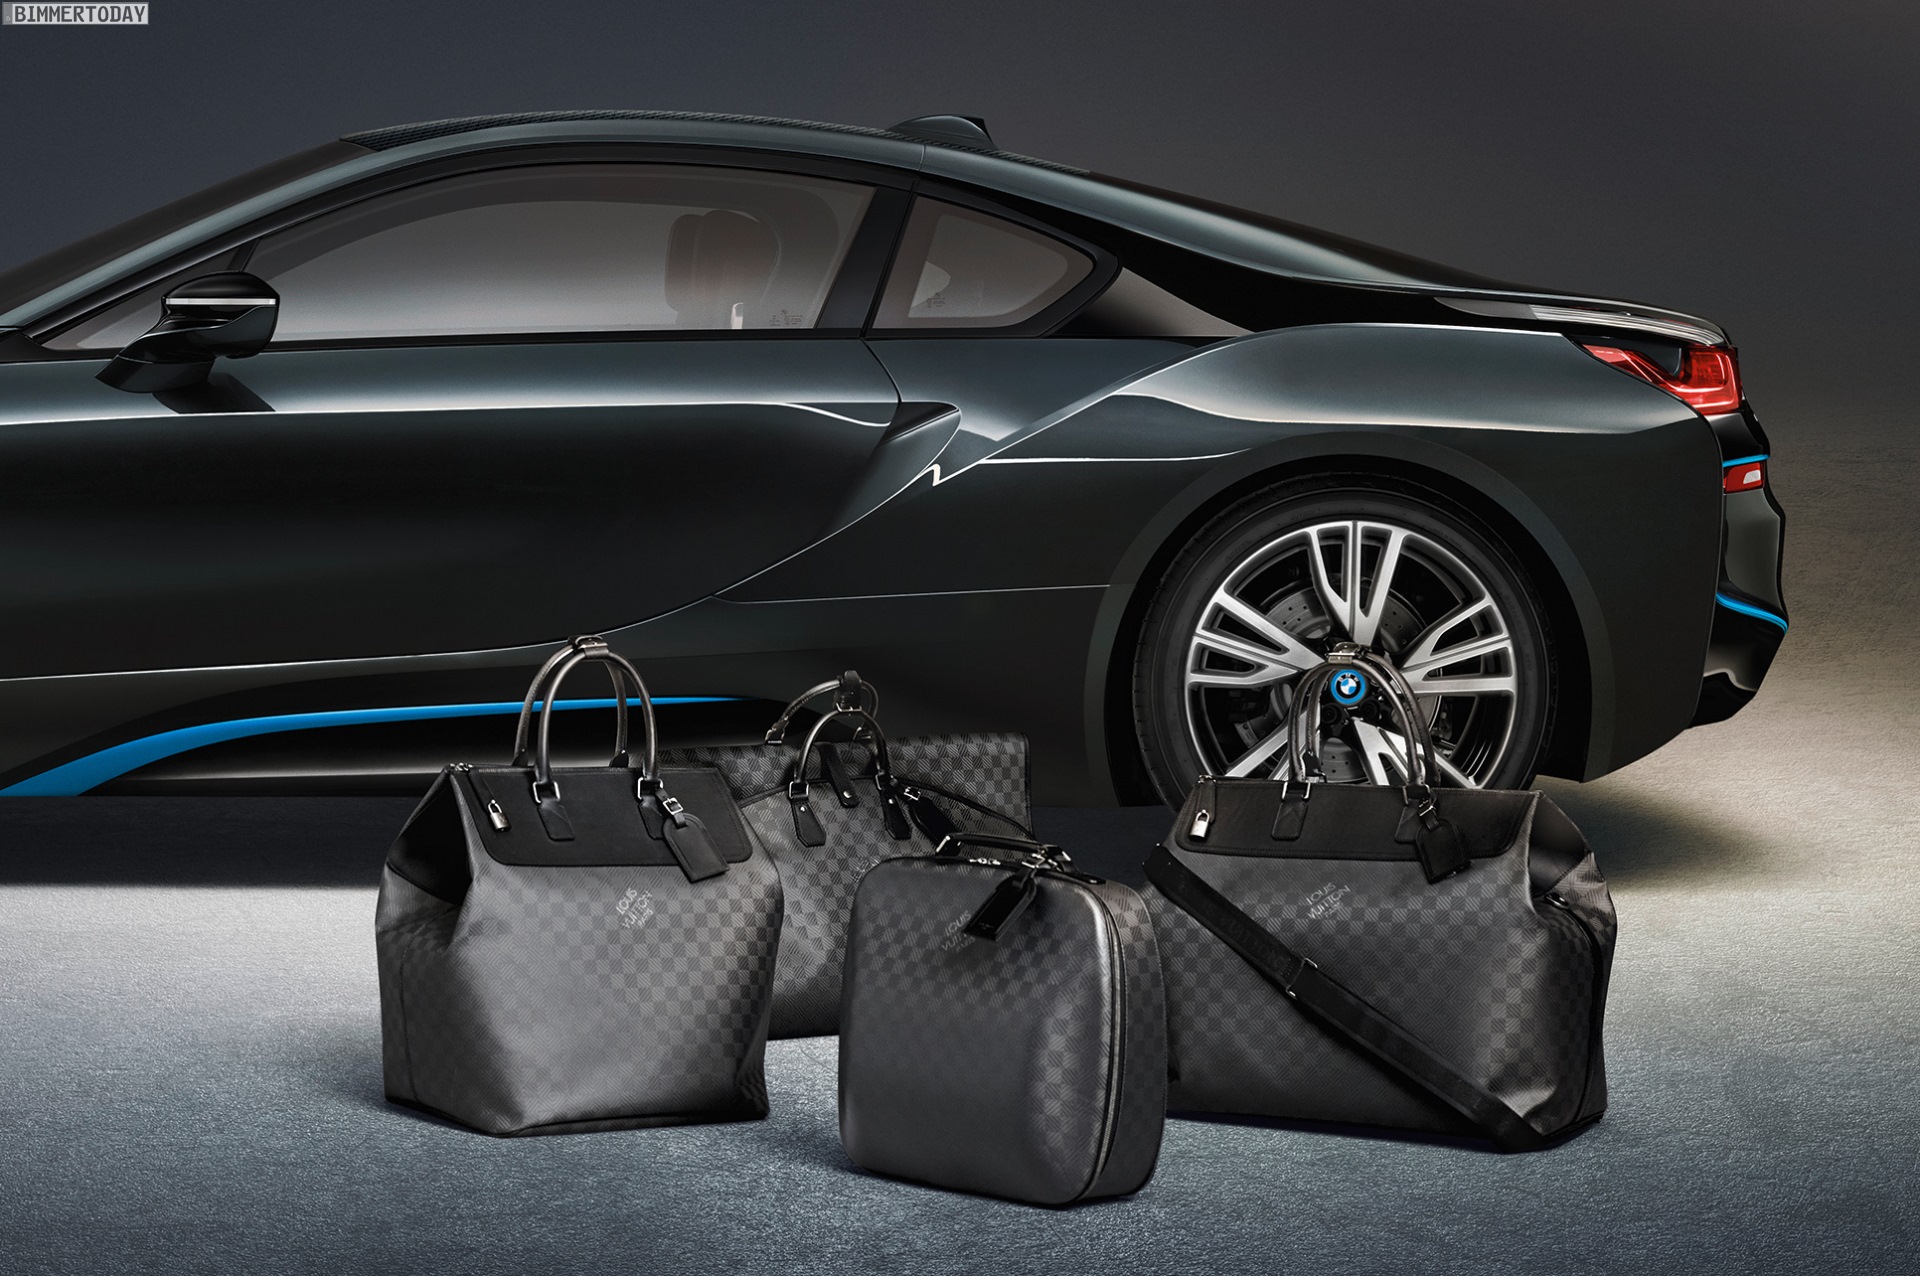 BudNews - Fast and luxurious: Louis Vuitton meets BMW